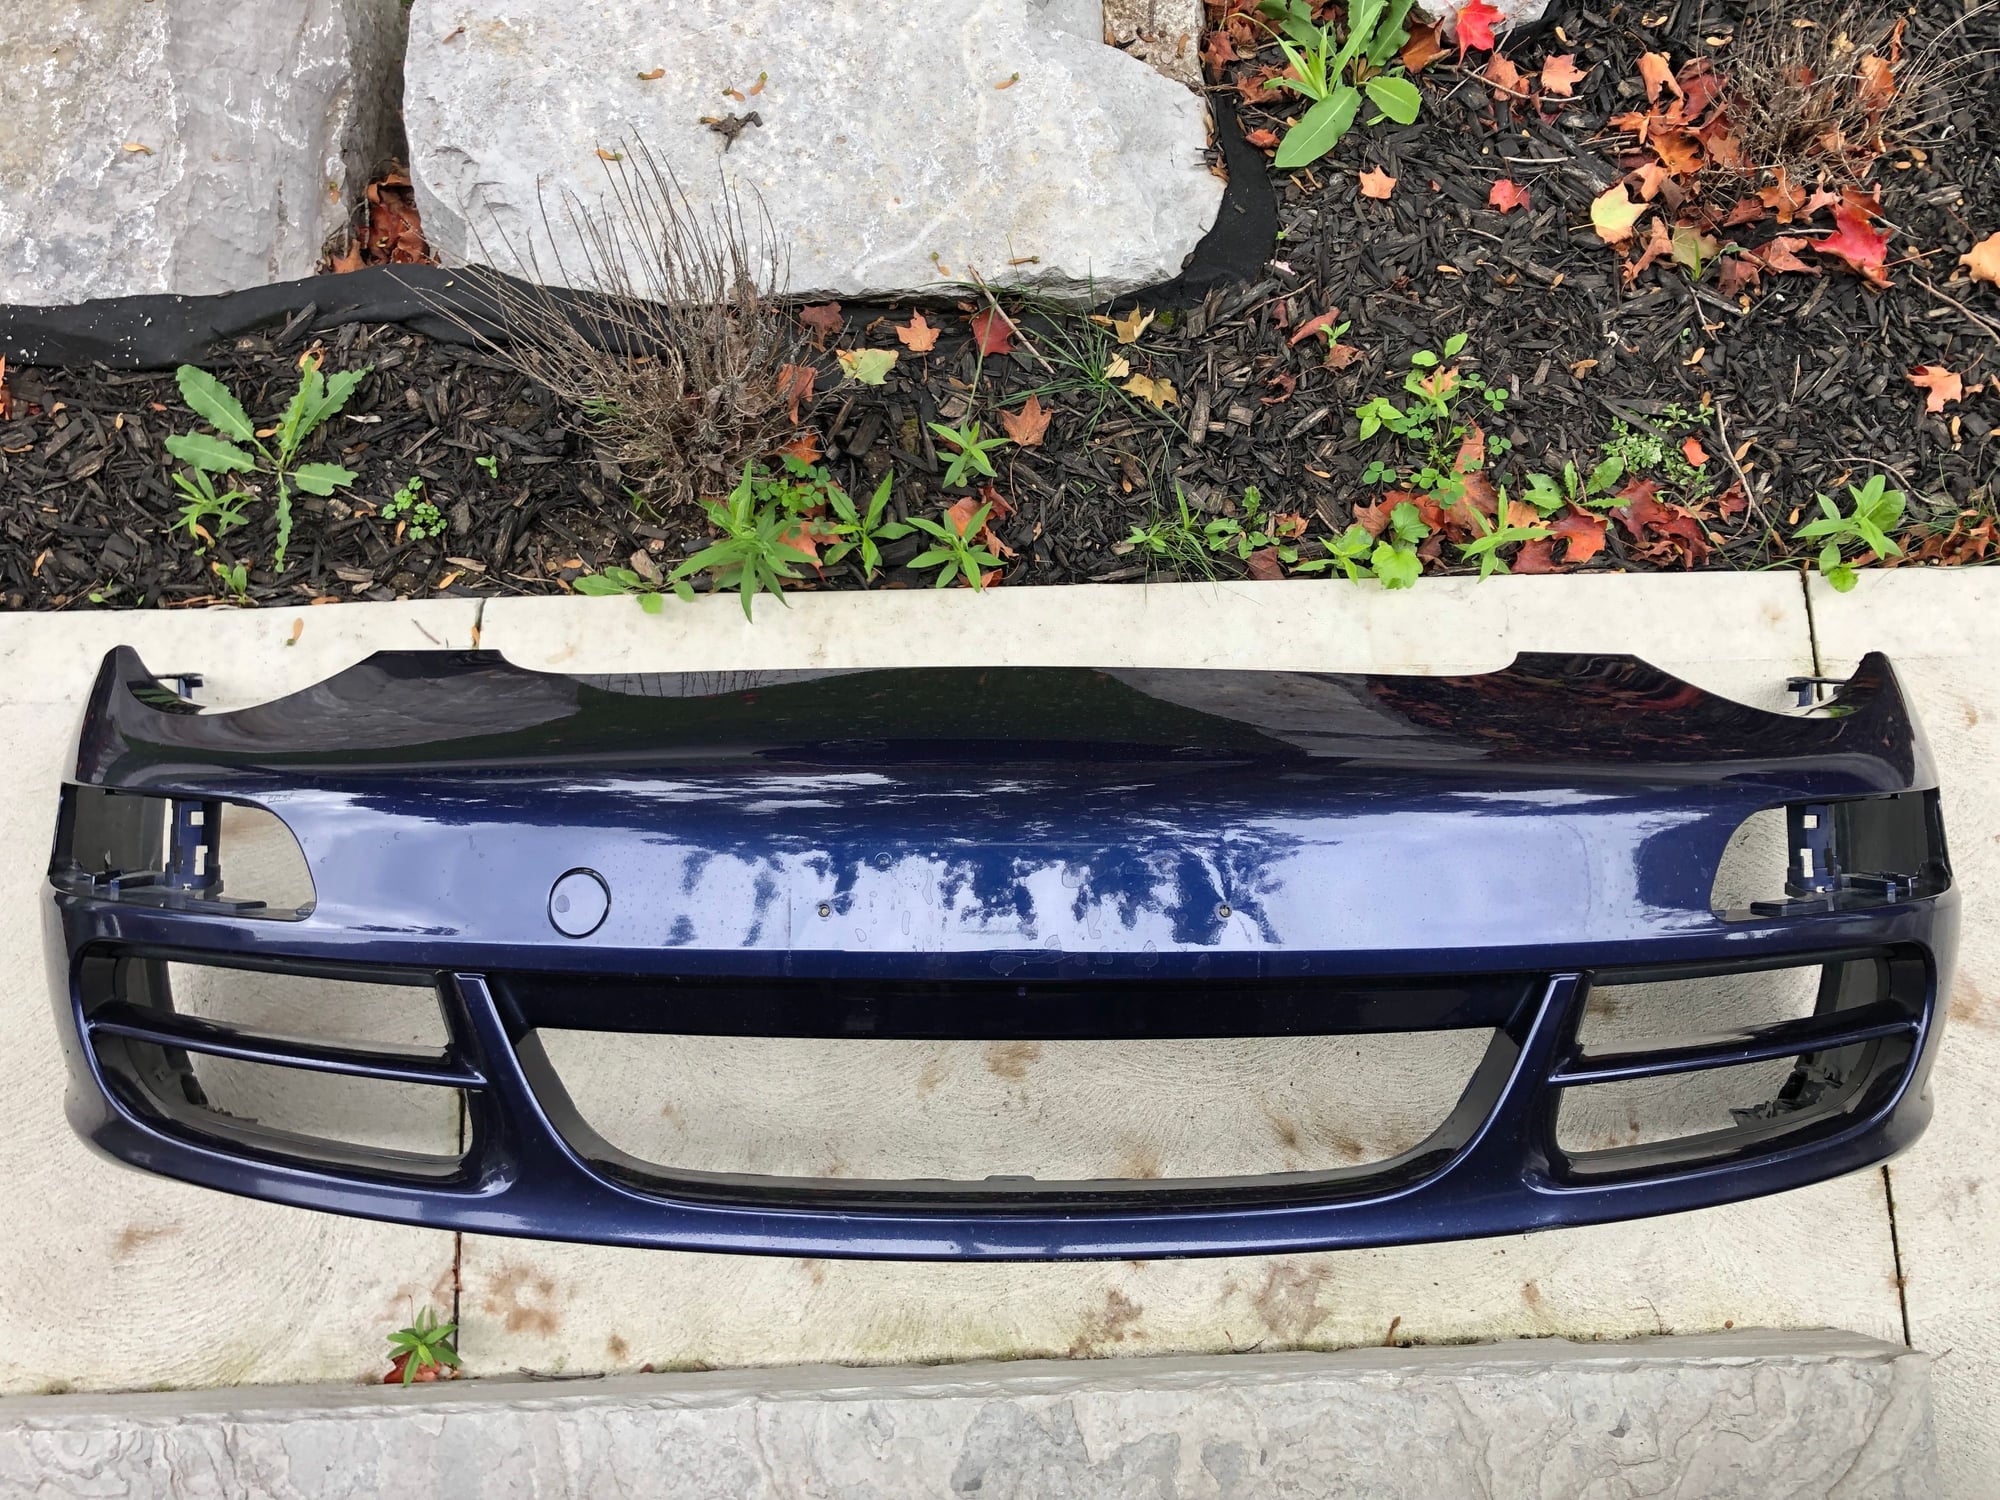 Exterior Body Parts - 997.1 front bumper fascia - lapis blue (needs paint) - Used - 2005 to 2007 Porsche 911 - Guelph, ON N1H4Y6, Canada